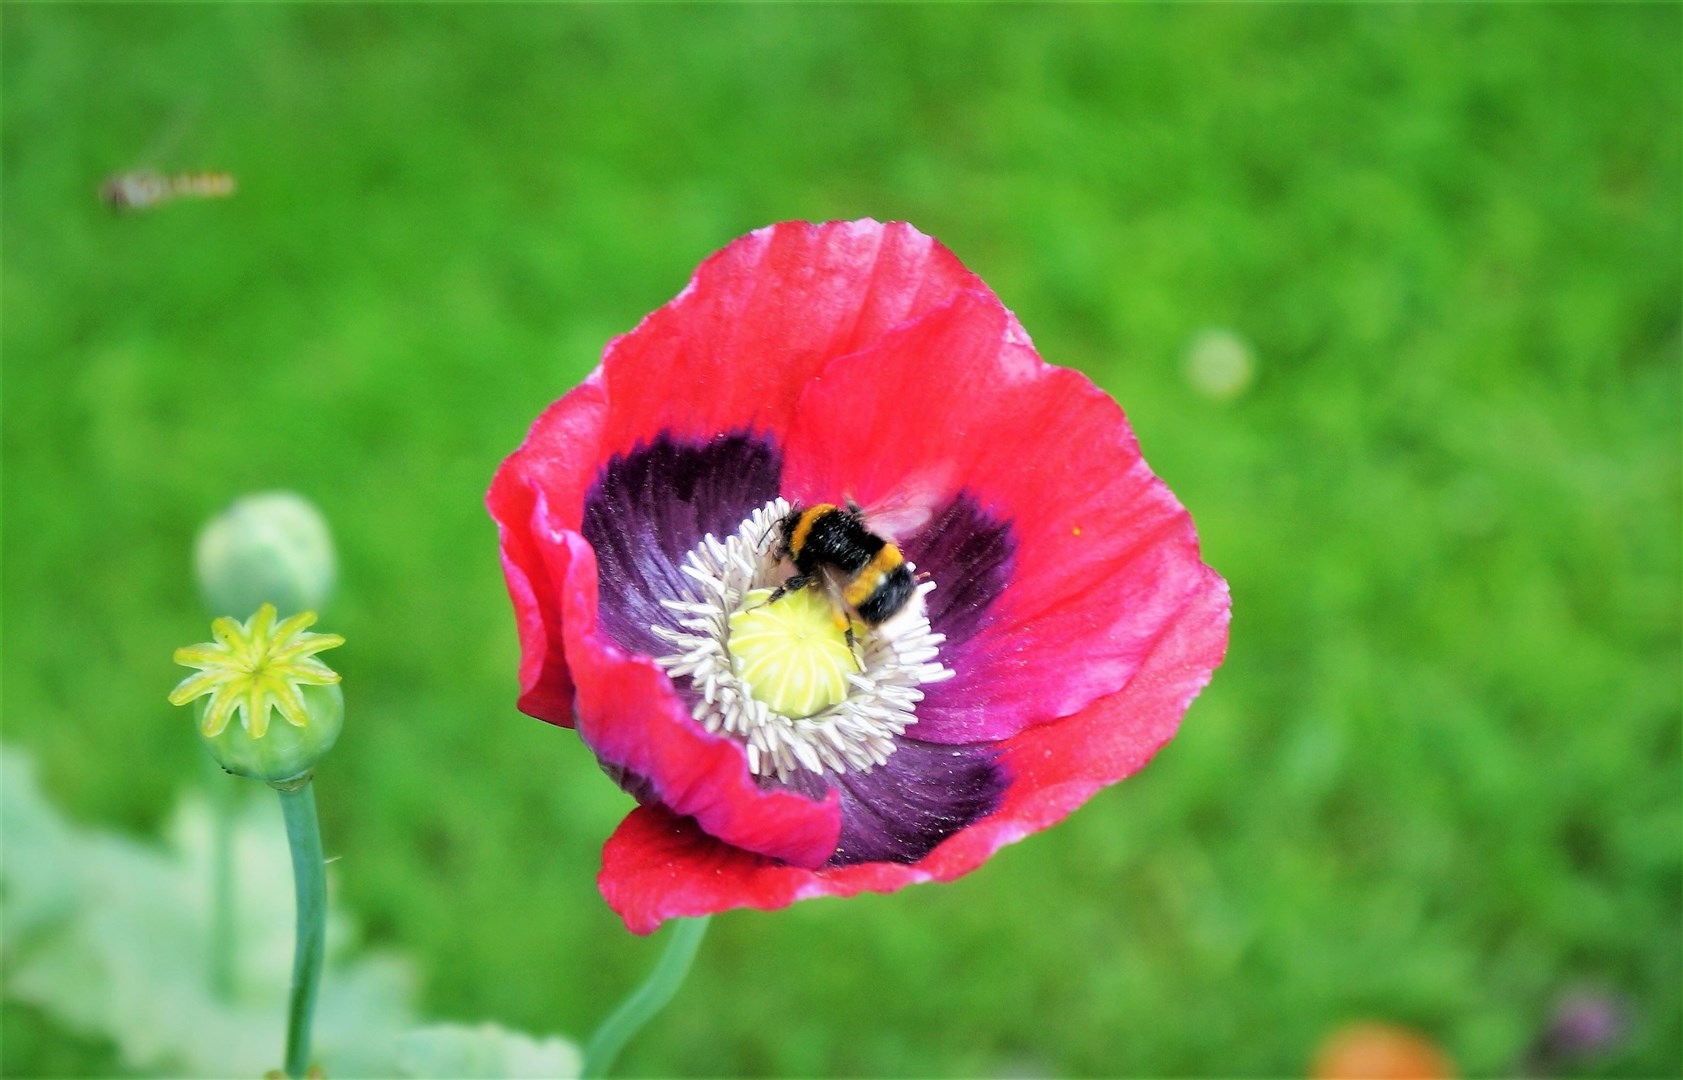 Growing a variety of flowers can help bees thrive.